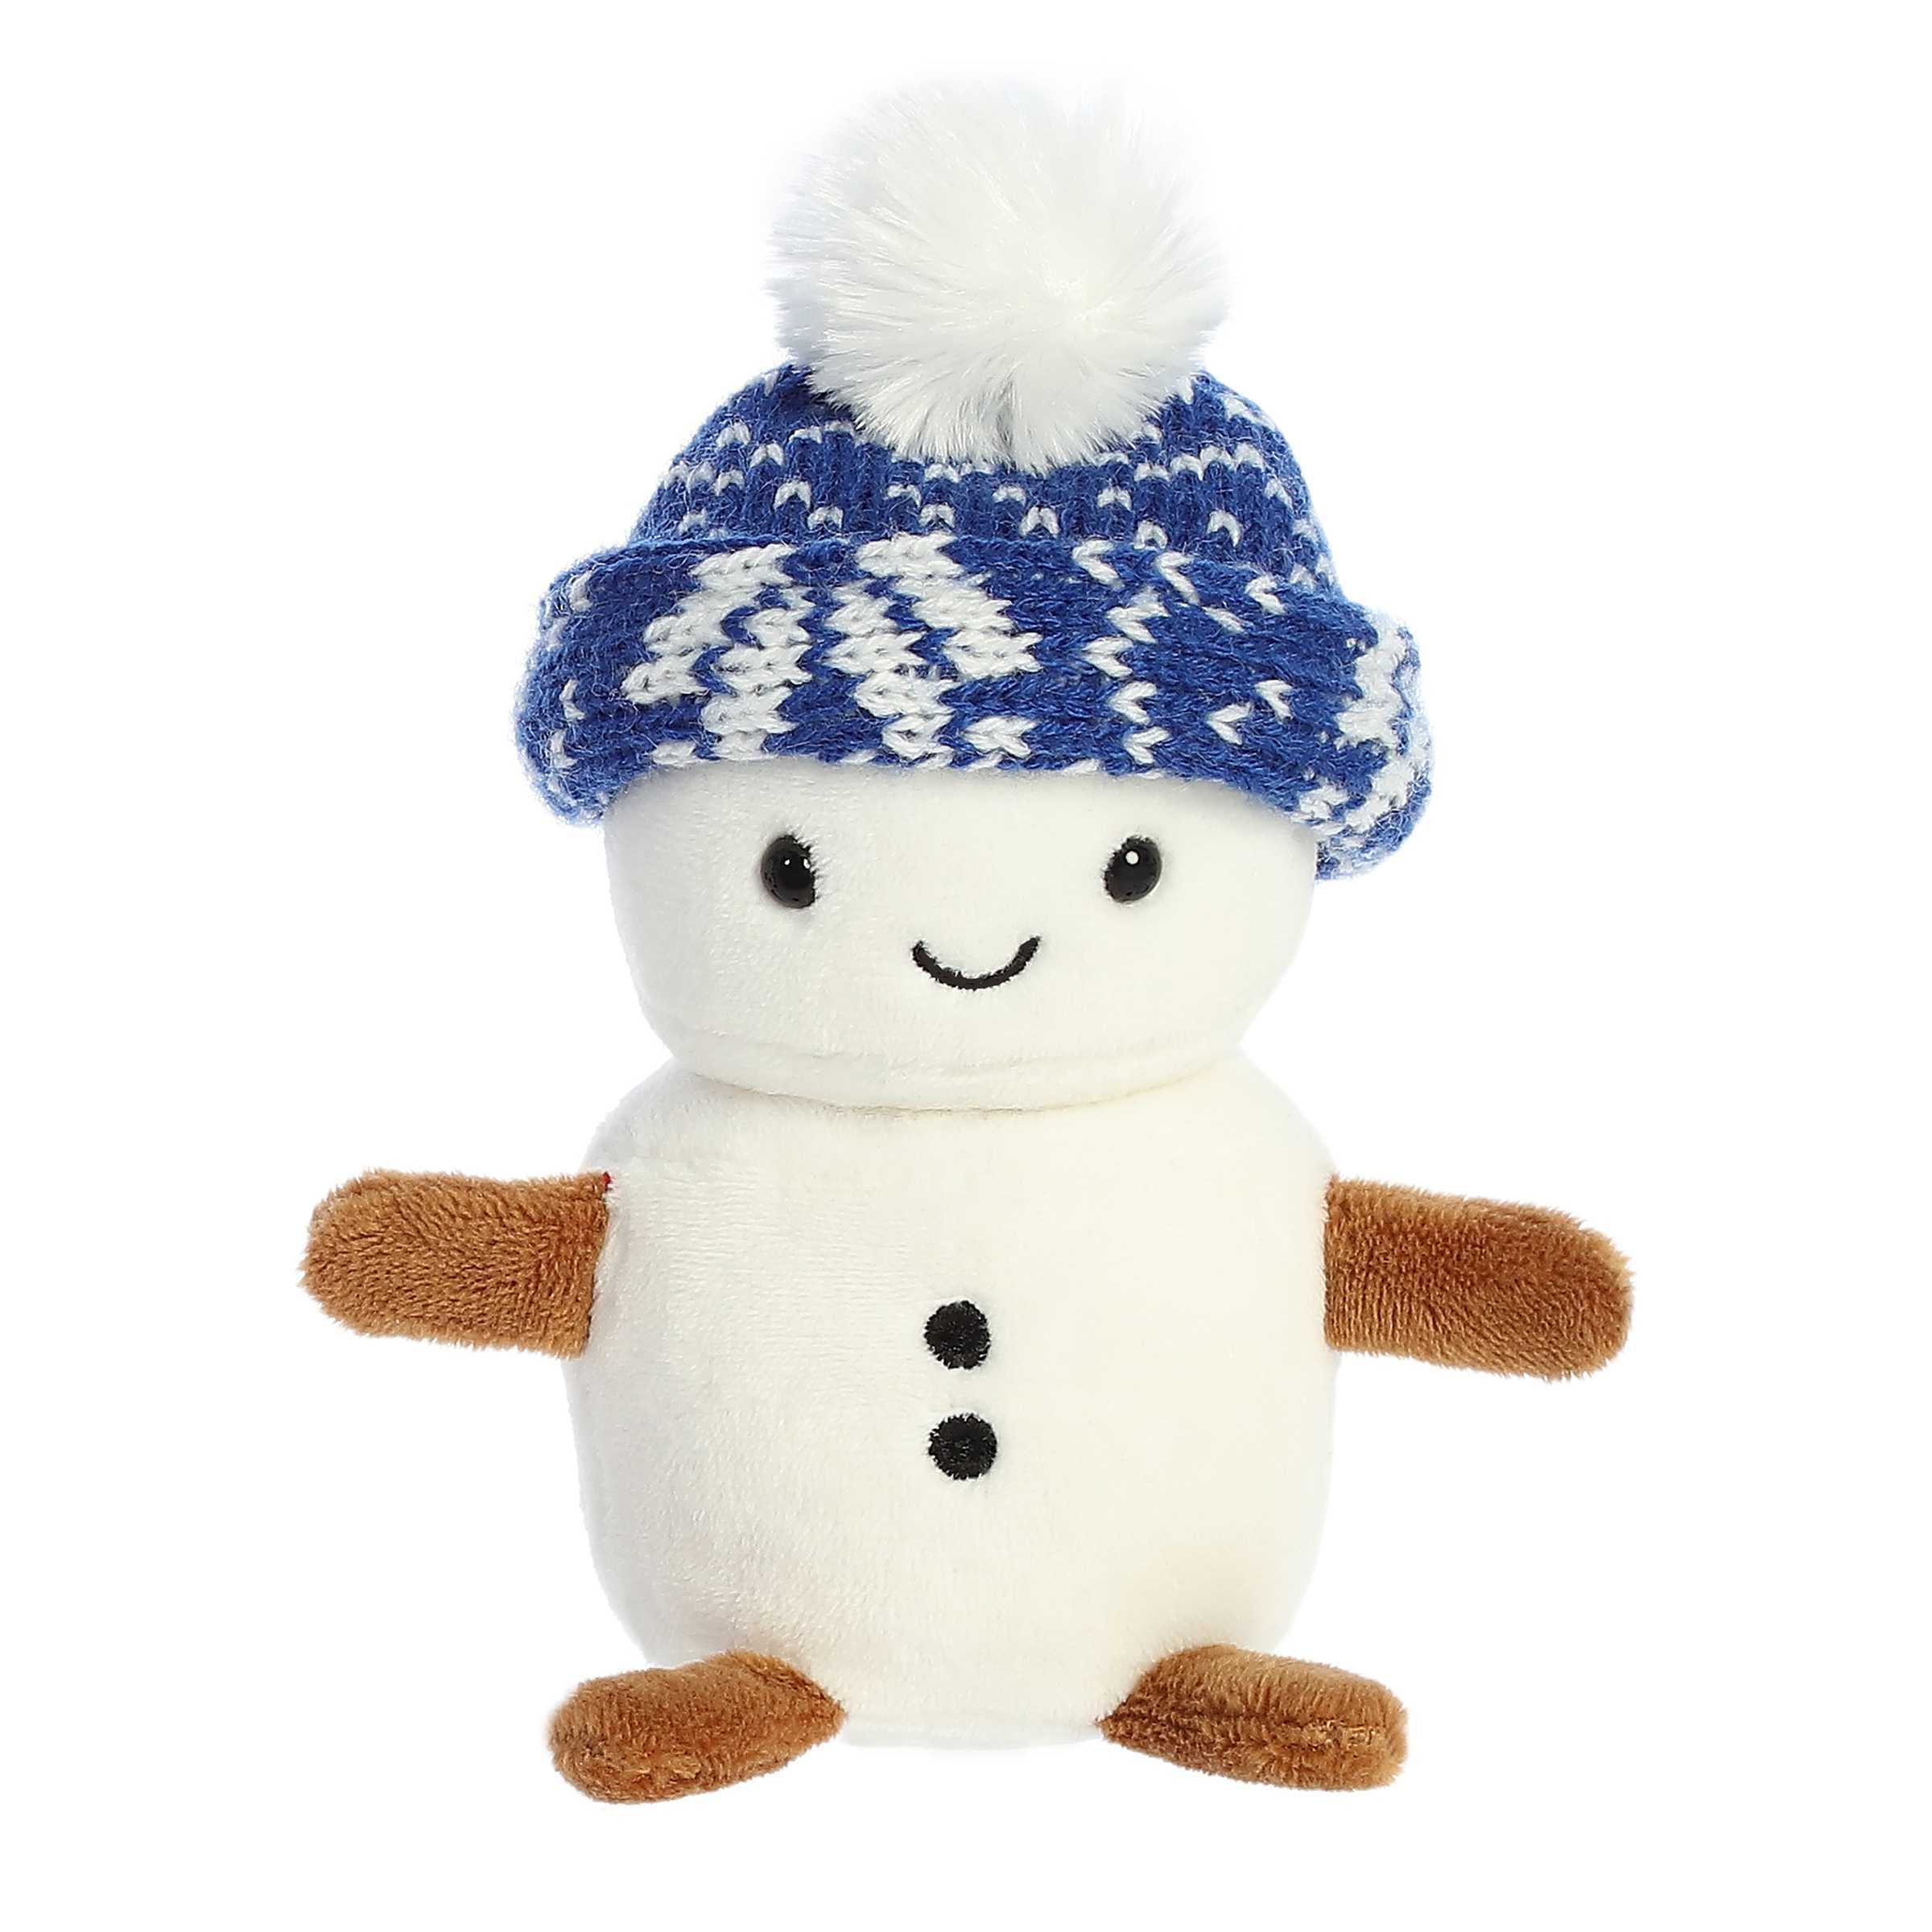 Smiling mini white snowman plushie with tiny brown arms and legs wearing a blue sweater print winter pom hat